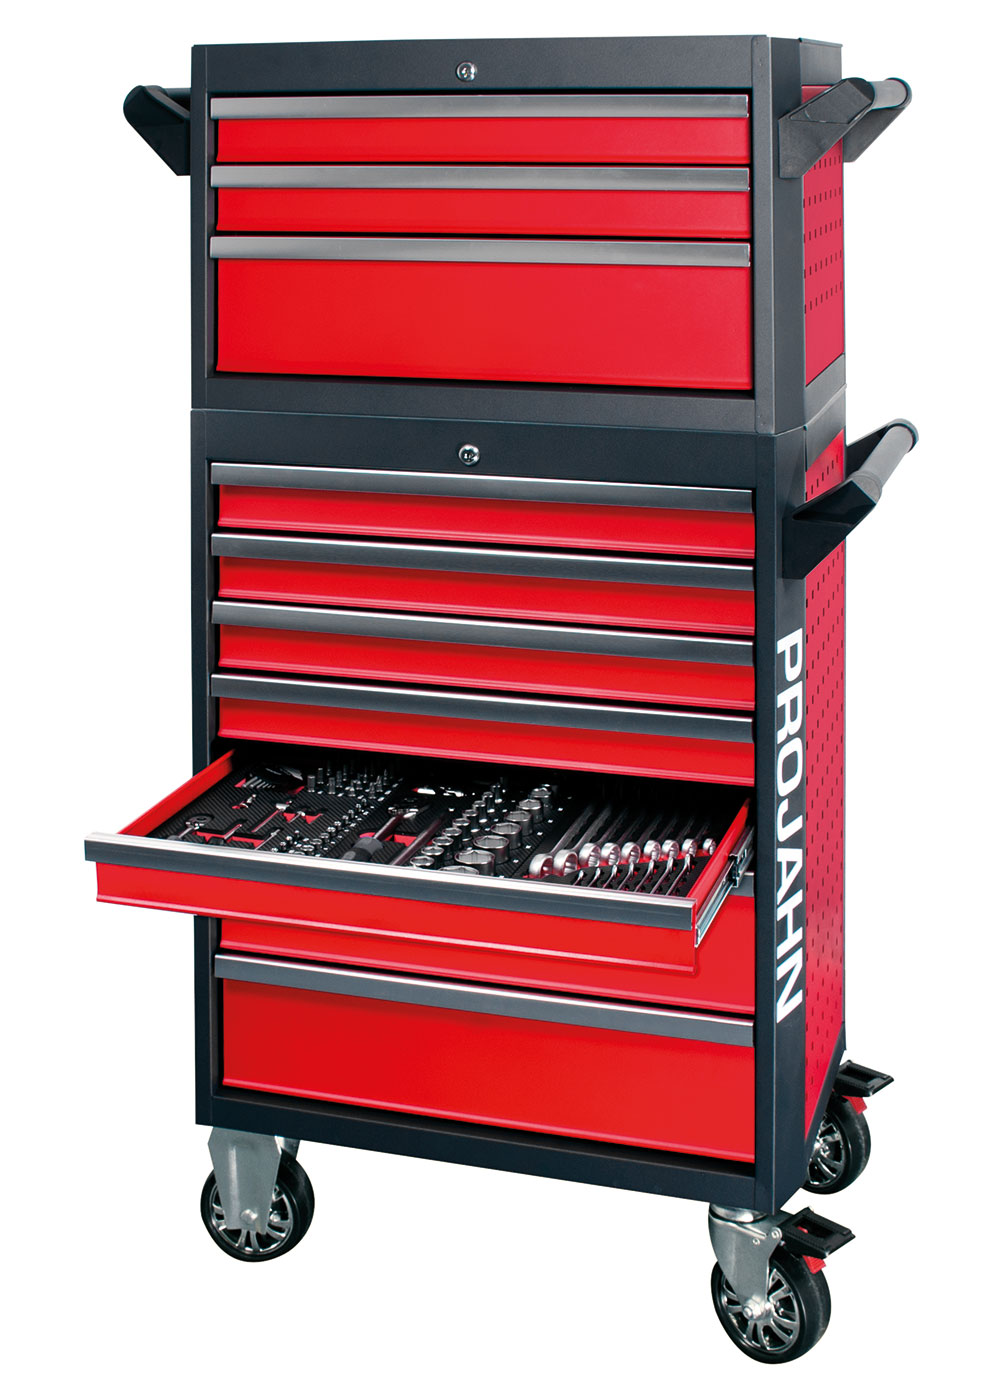 Roller cabinet GALAXY Special Edition "COMPLETE" Red / Anthracite 